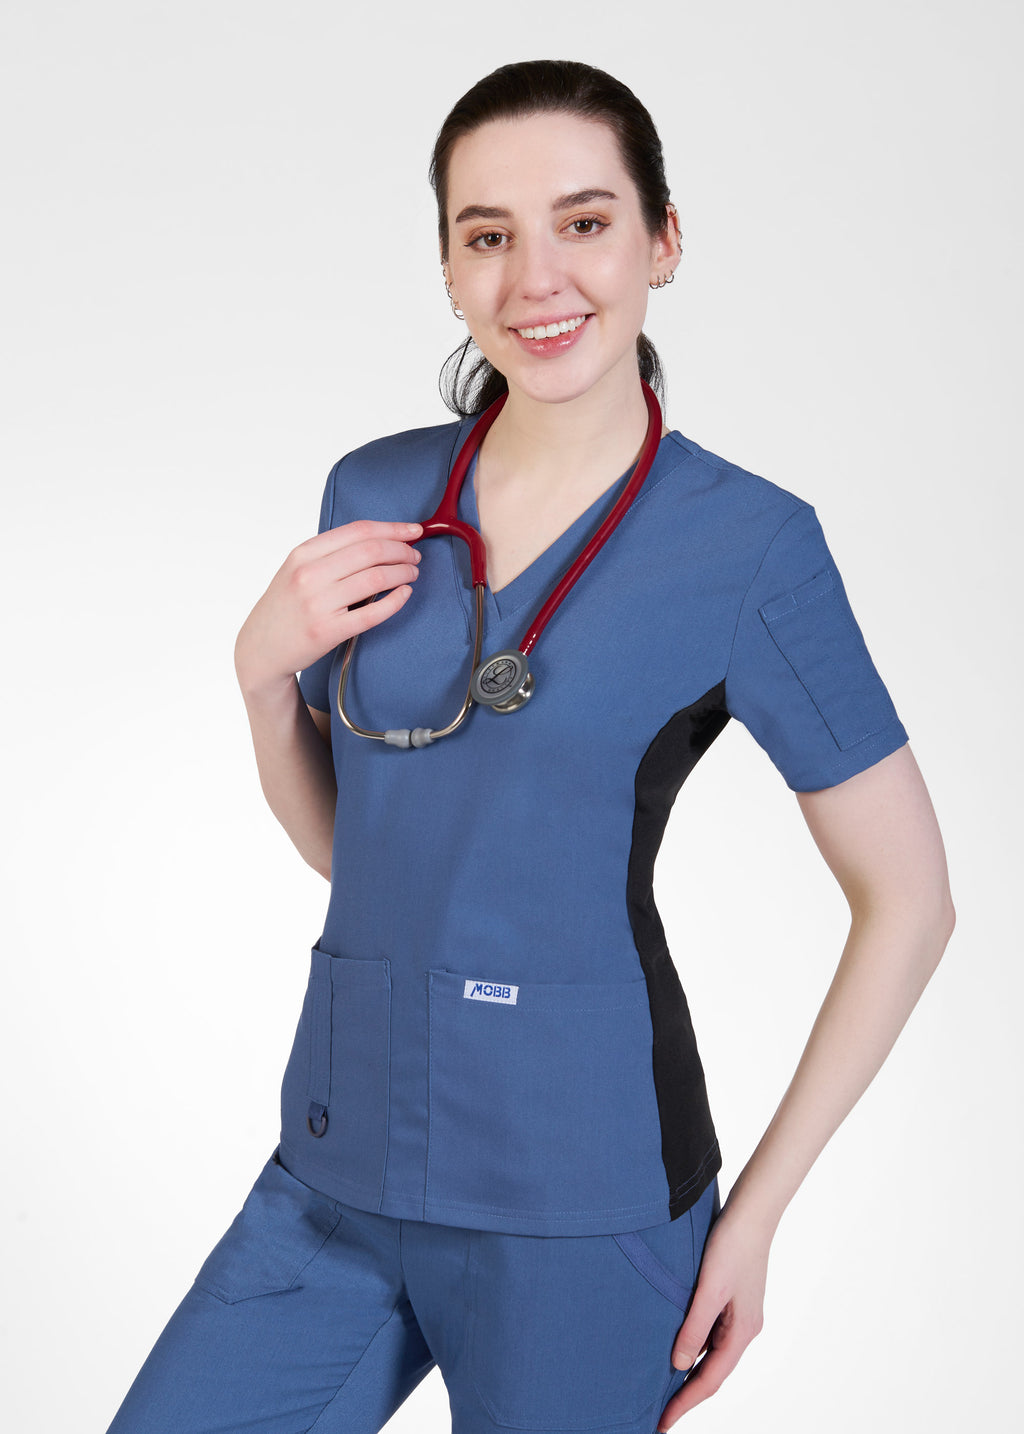 Product - The Pearl MOBB Scrub Top